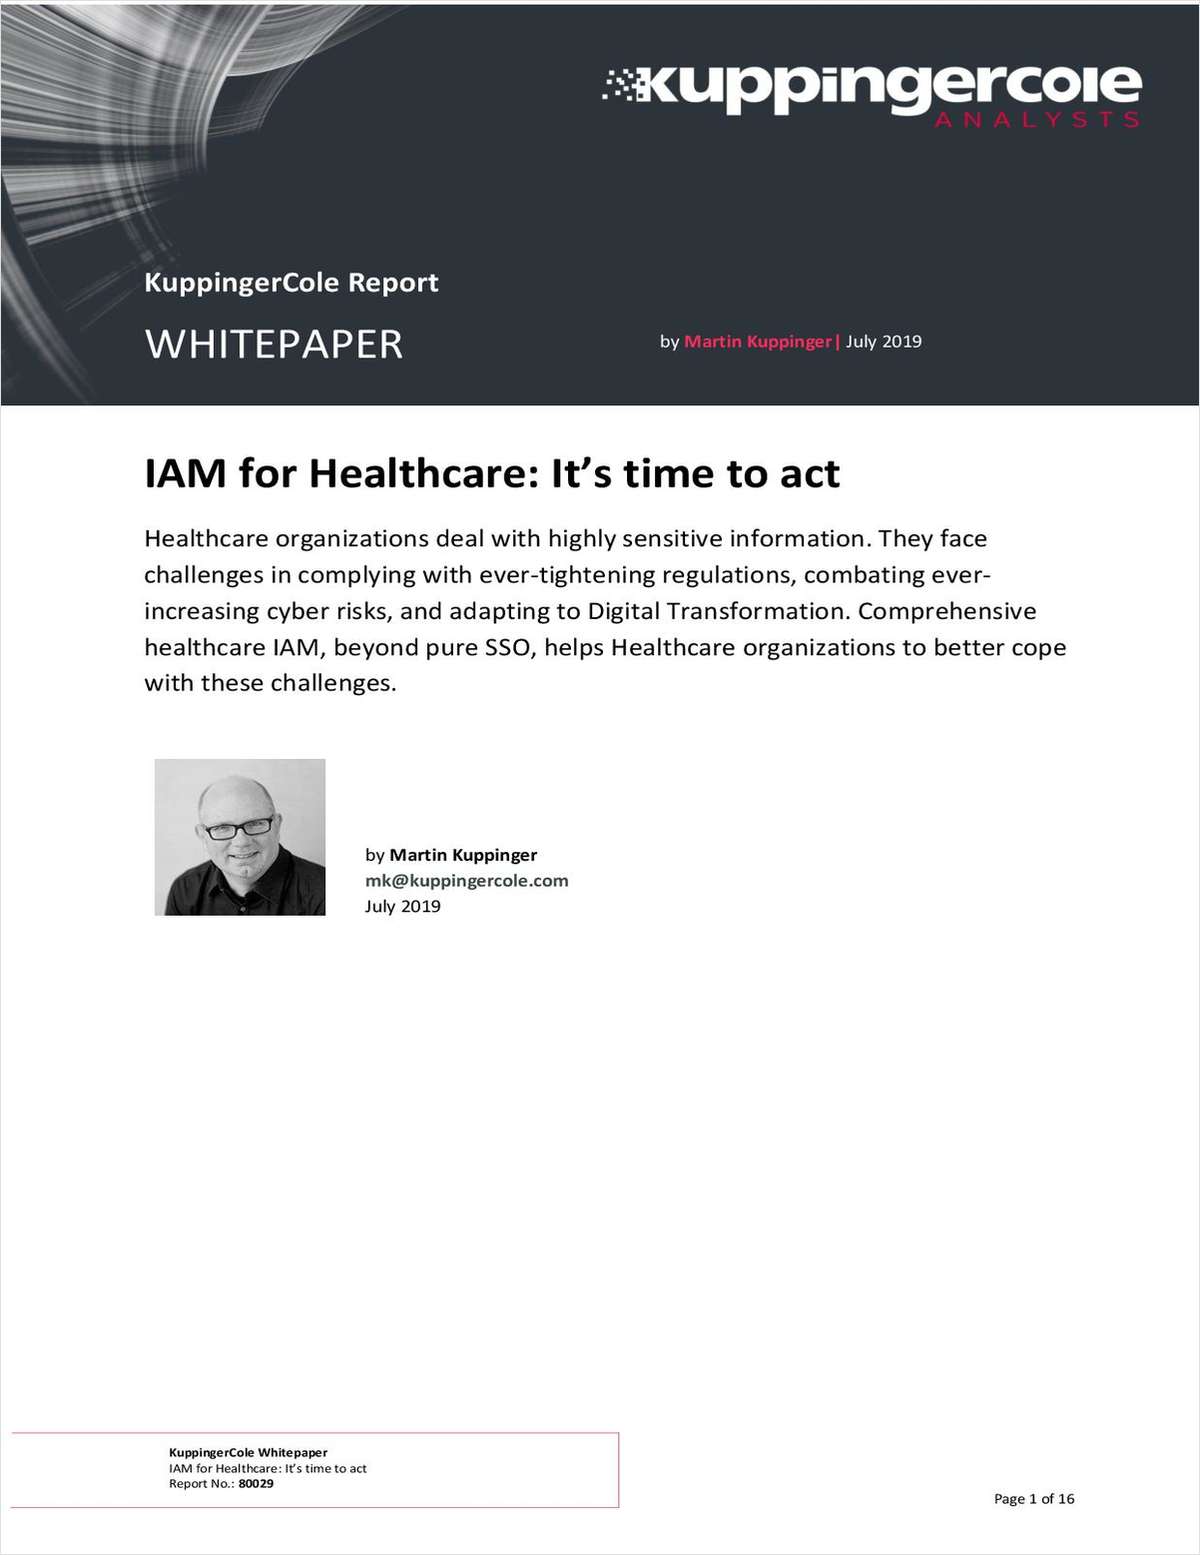 [KuppingerCole Report] IAM in Healthcare: It's time to act